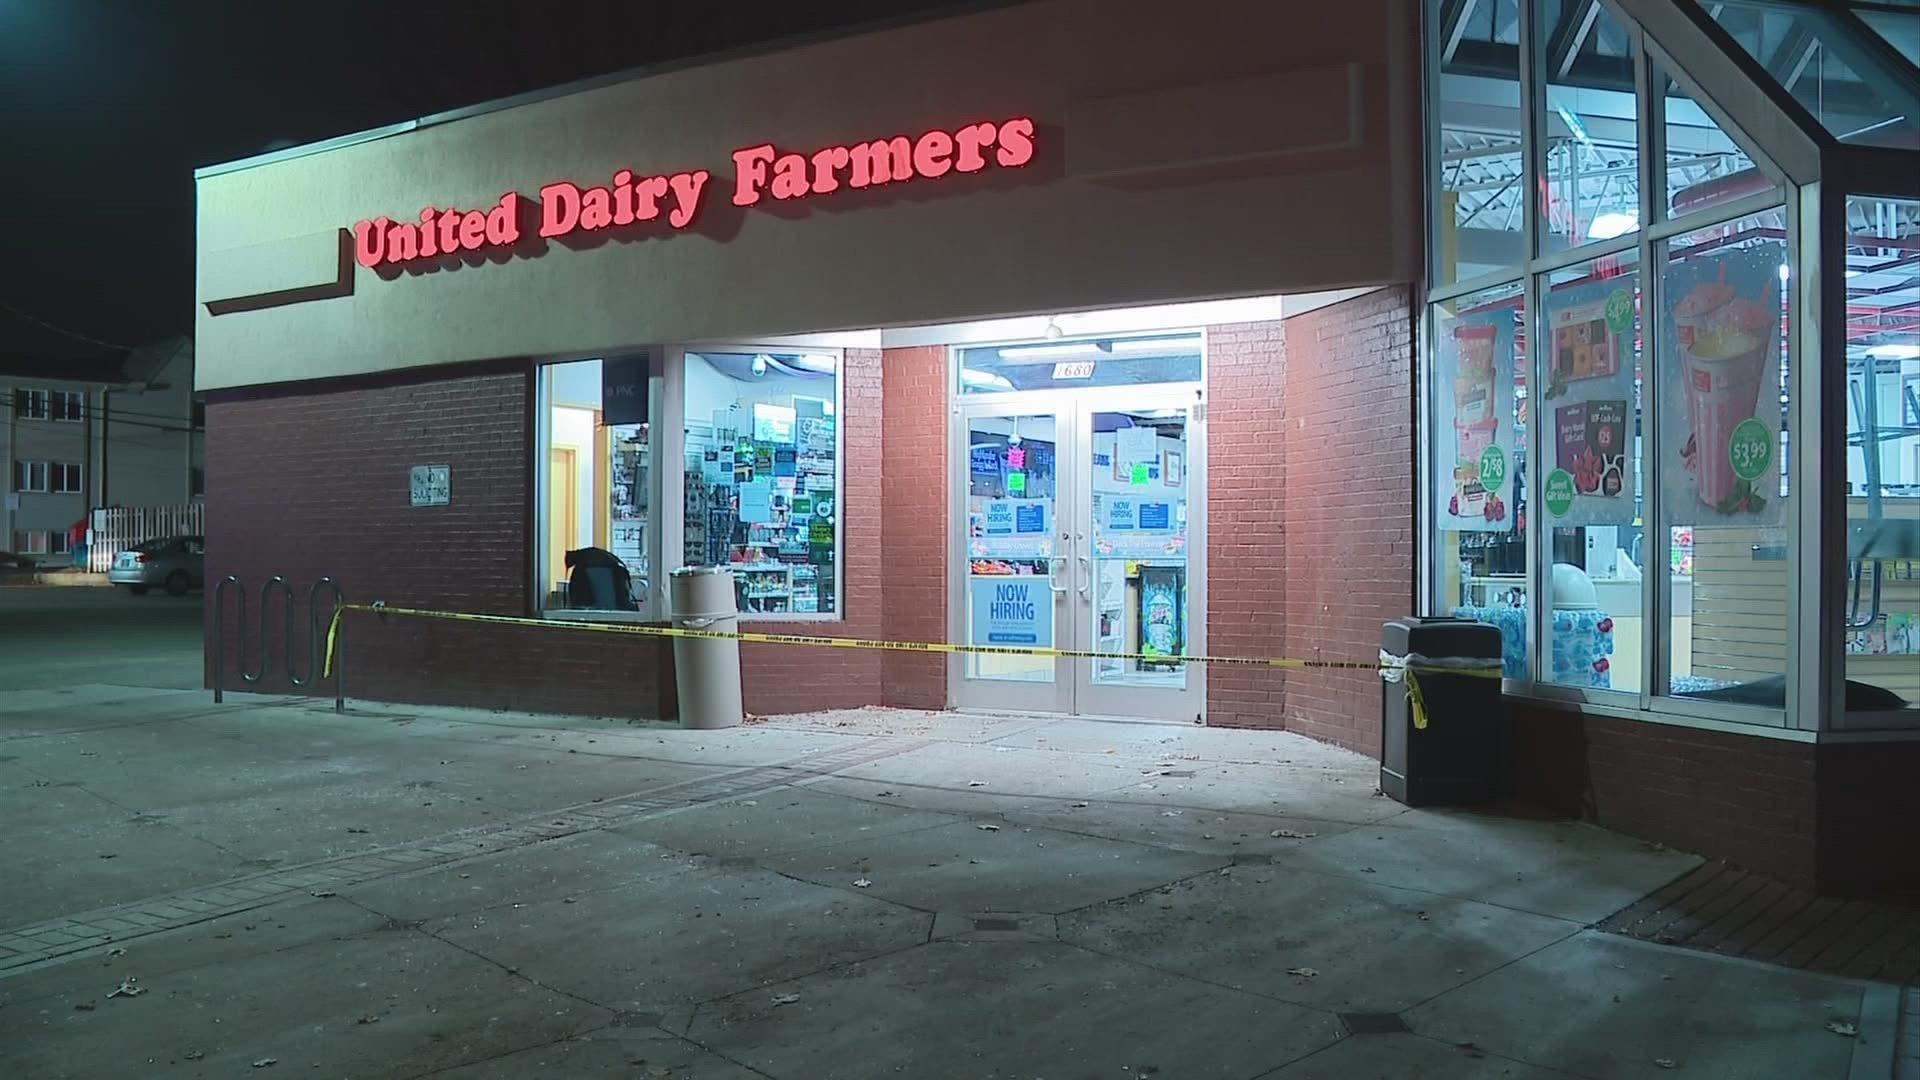 Police said the robbery happened at the UDF store located at 1680 North High Street near 12th Avenue around 6:30 p.m.